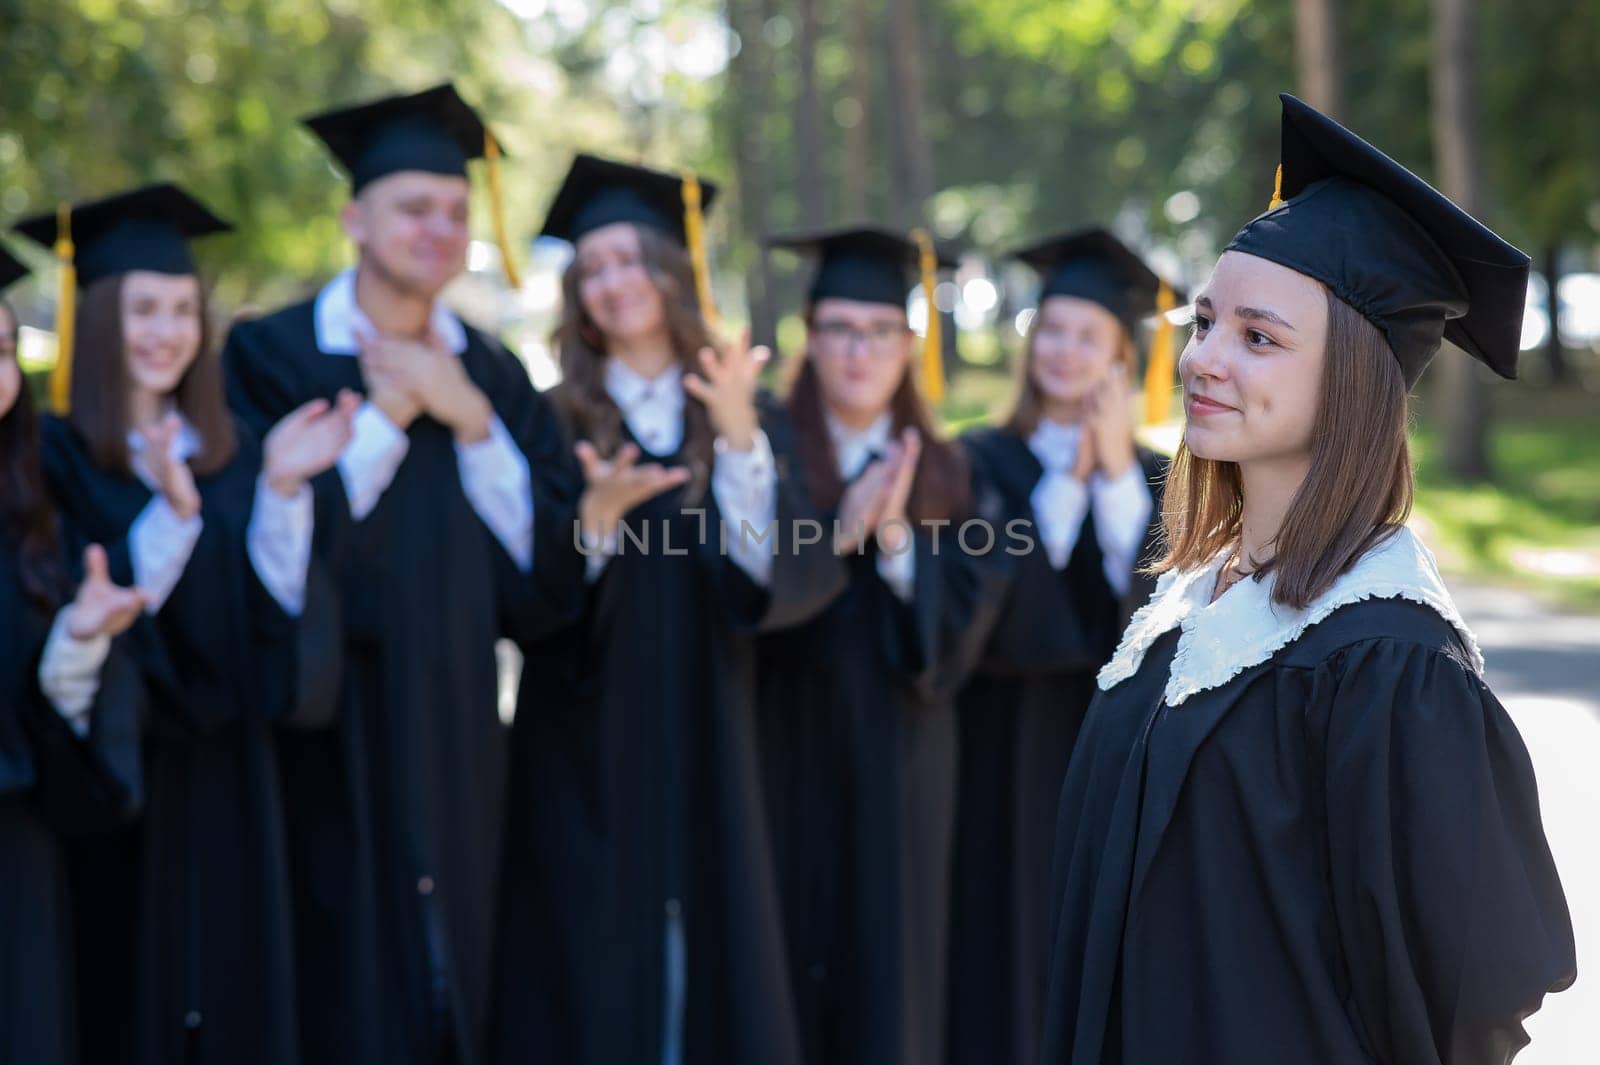 Group of happy students in graduation gowns outdoors. A young girl in the foreground. by mrwed54